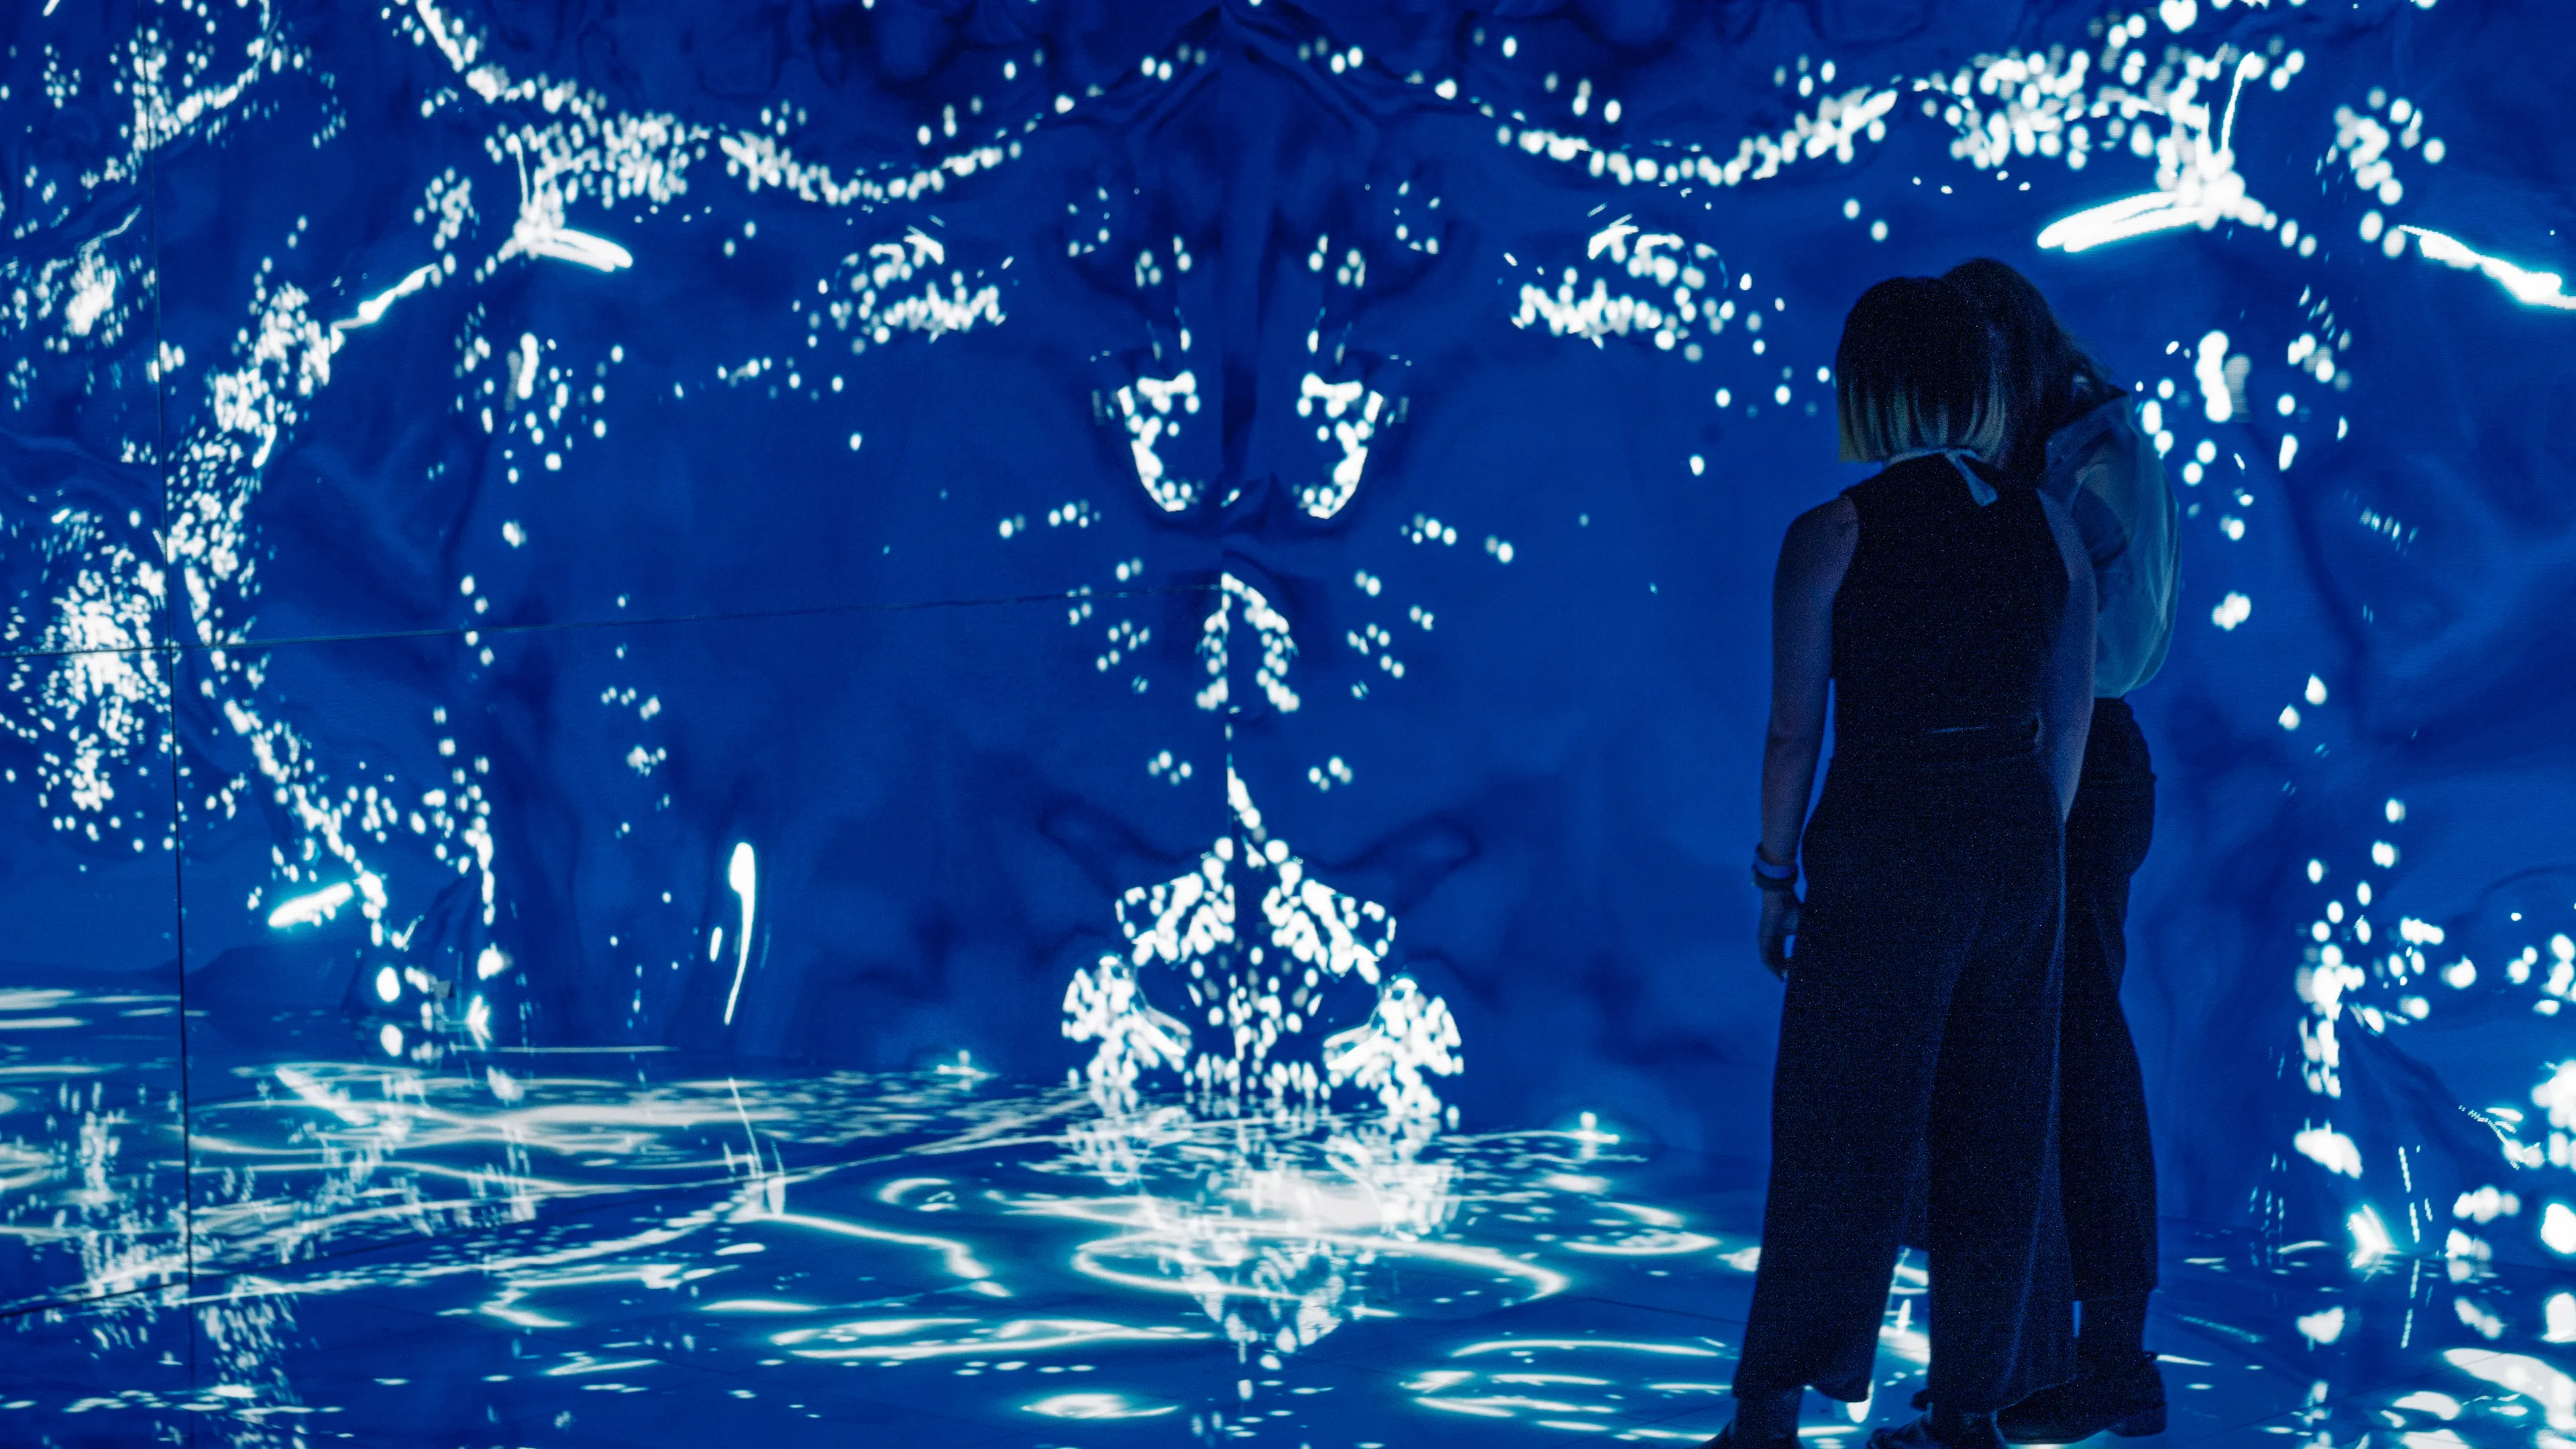 Two people standing in an interactive installation, blue water graphics surround them on the walls and floor, mirrored walls reflect the graphics